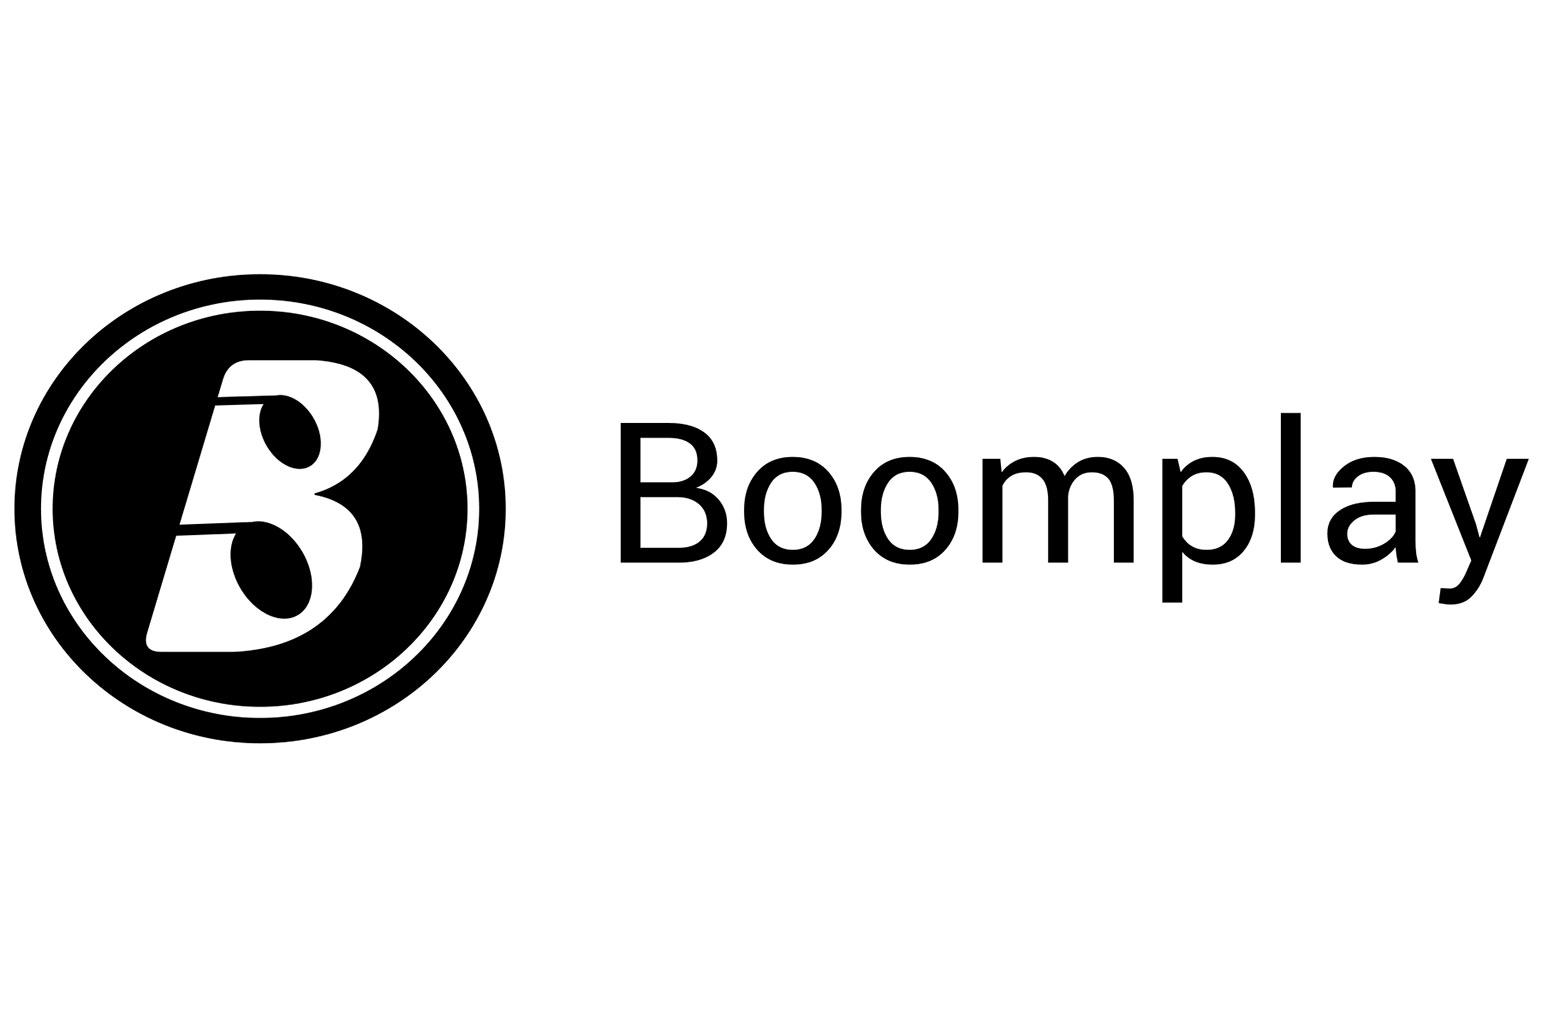 How Much Does Boomplay Pay Per Stream in Dollars